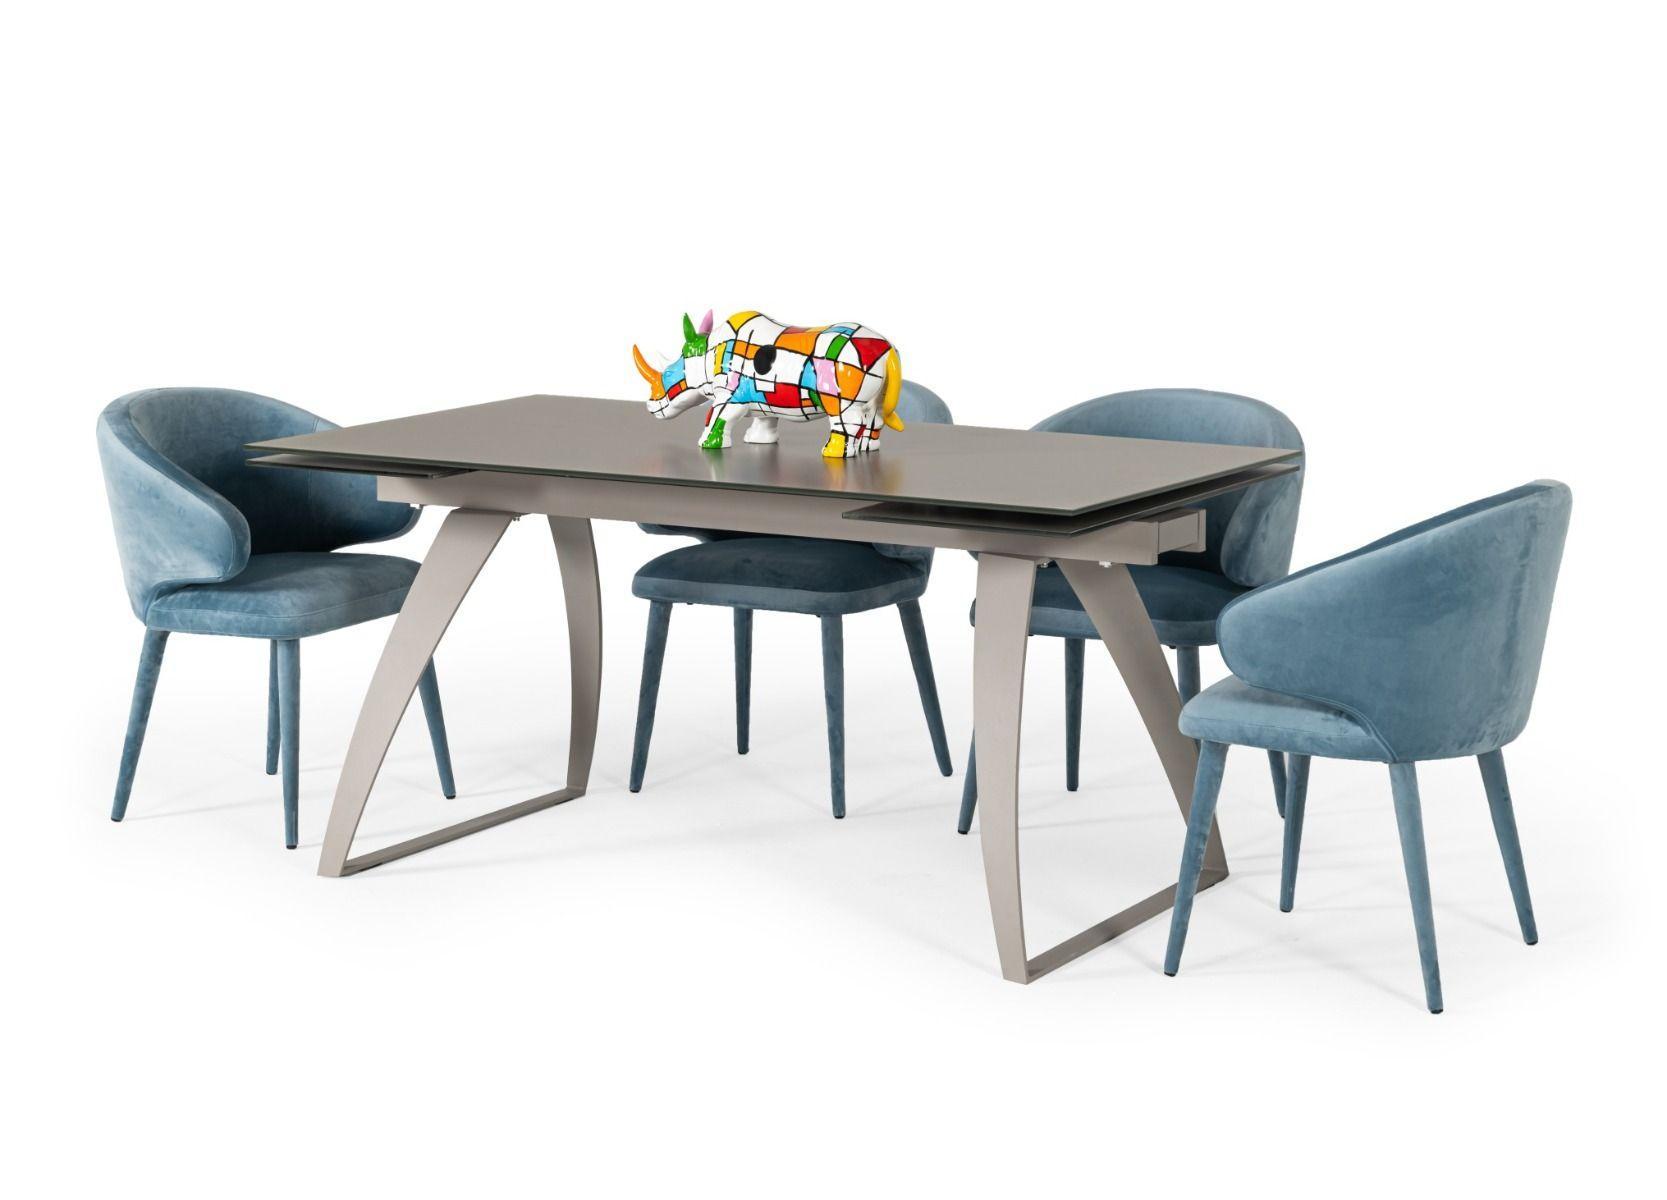 Contemporary, Modern Dining Room Set Pittson Salem VGYFDT8852F-GRY-DT-5pcs in Gray Fabric